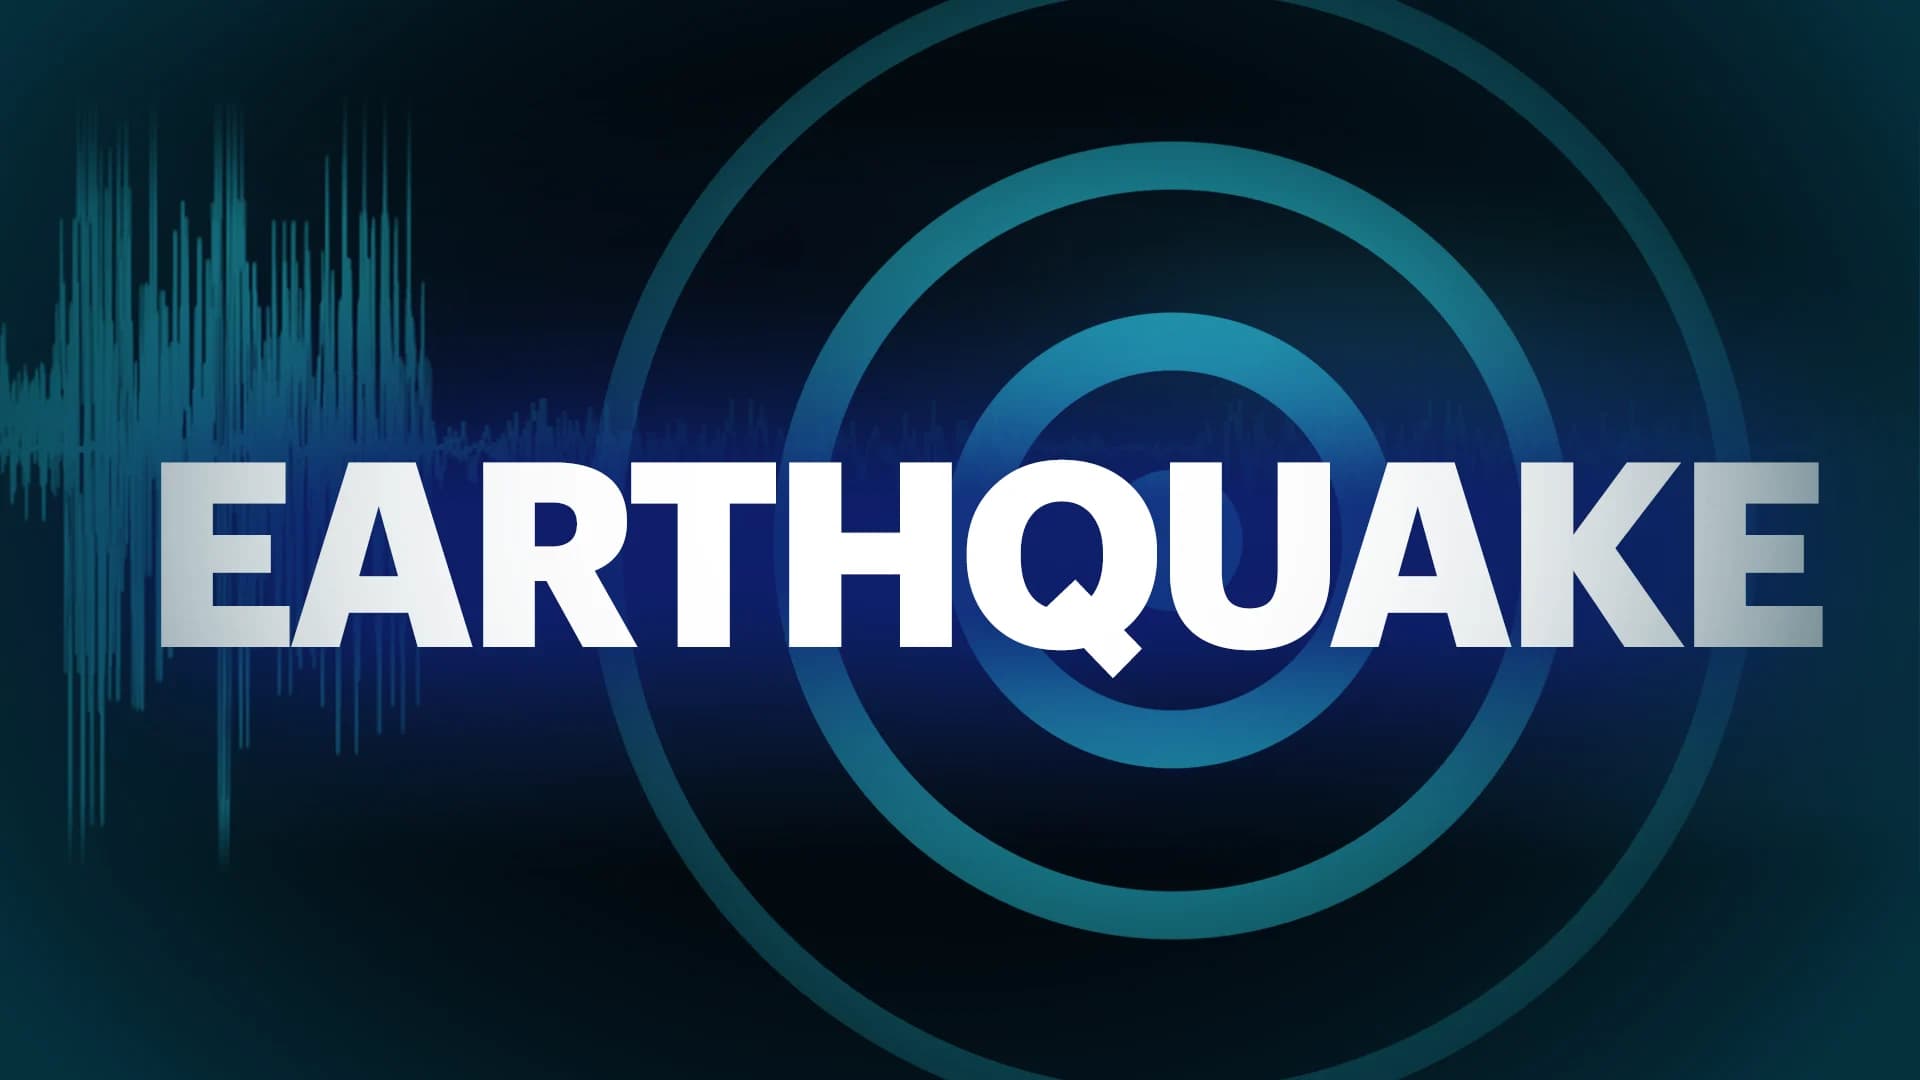 A 5.4 magnitude earthquake has shaken Jamaica with no reports of casualties or serious damage